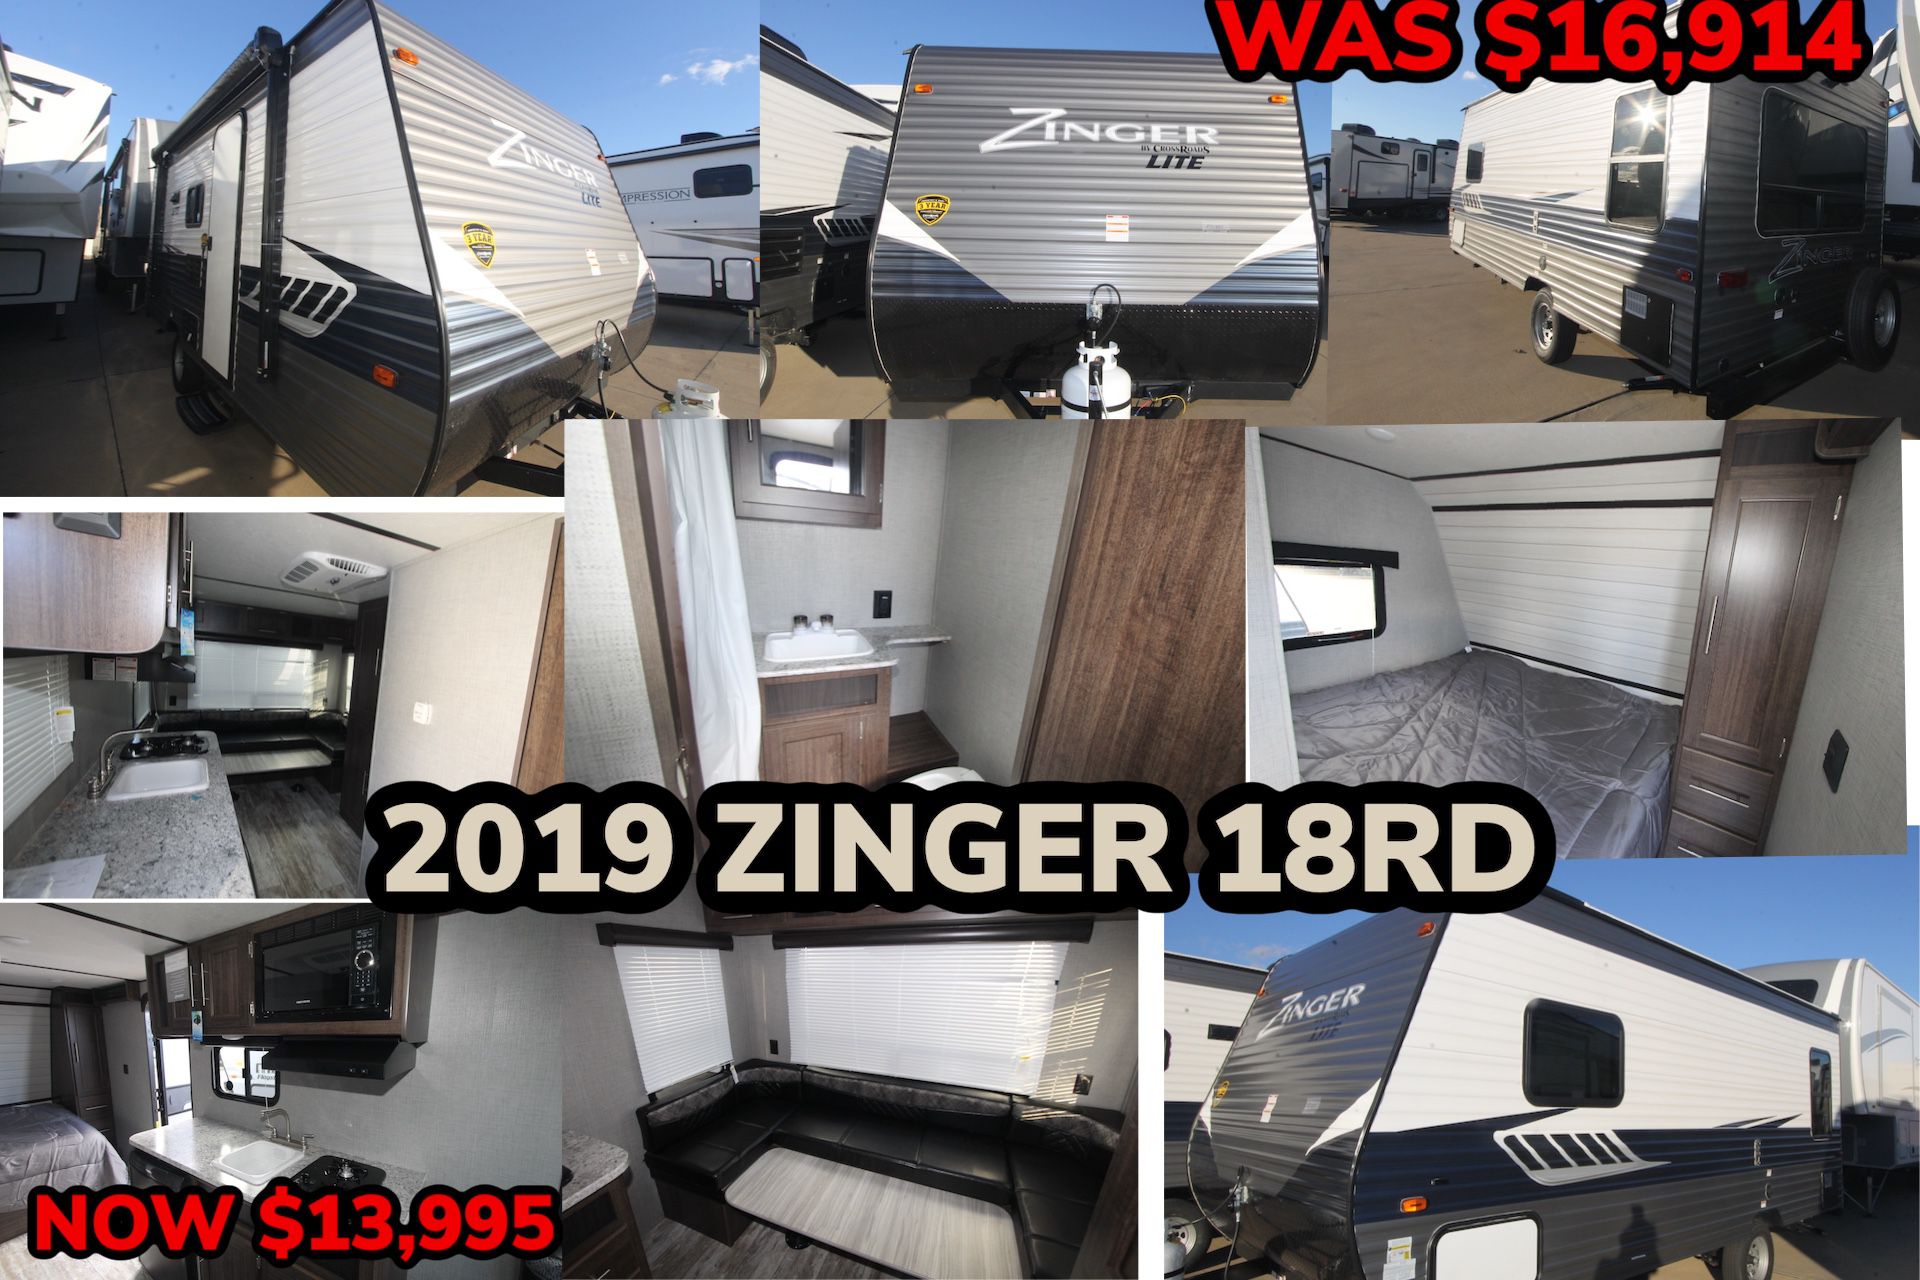 END OF THE YEAR CLEARANCE SALE!! 2019 ZINGER 18RD